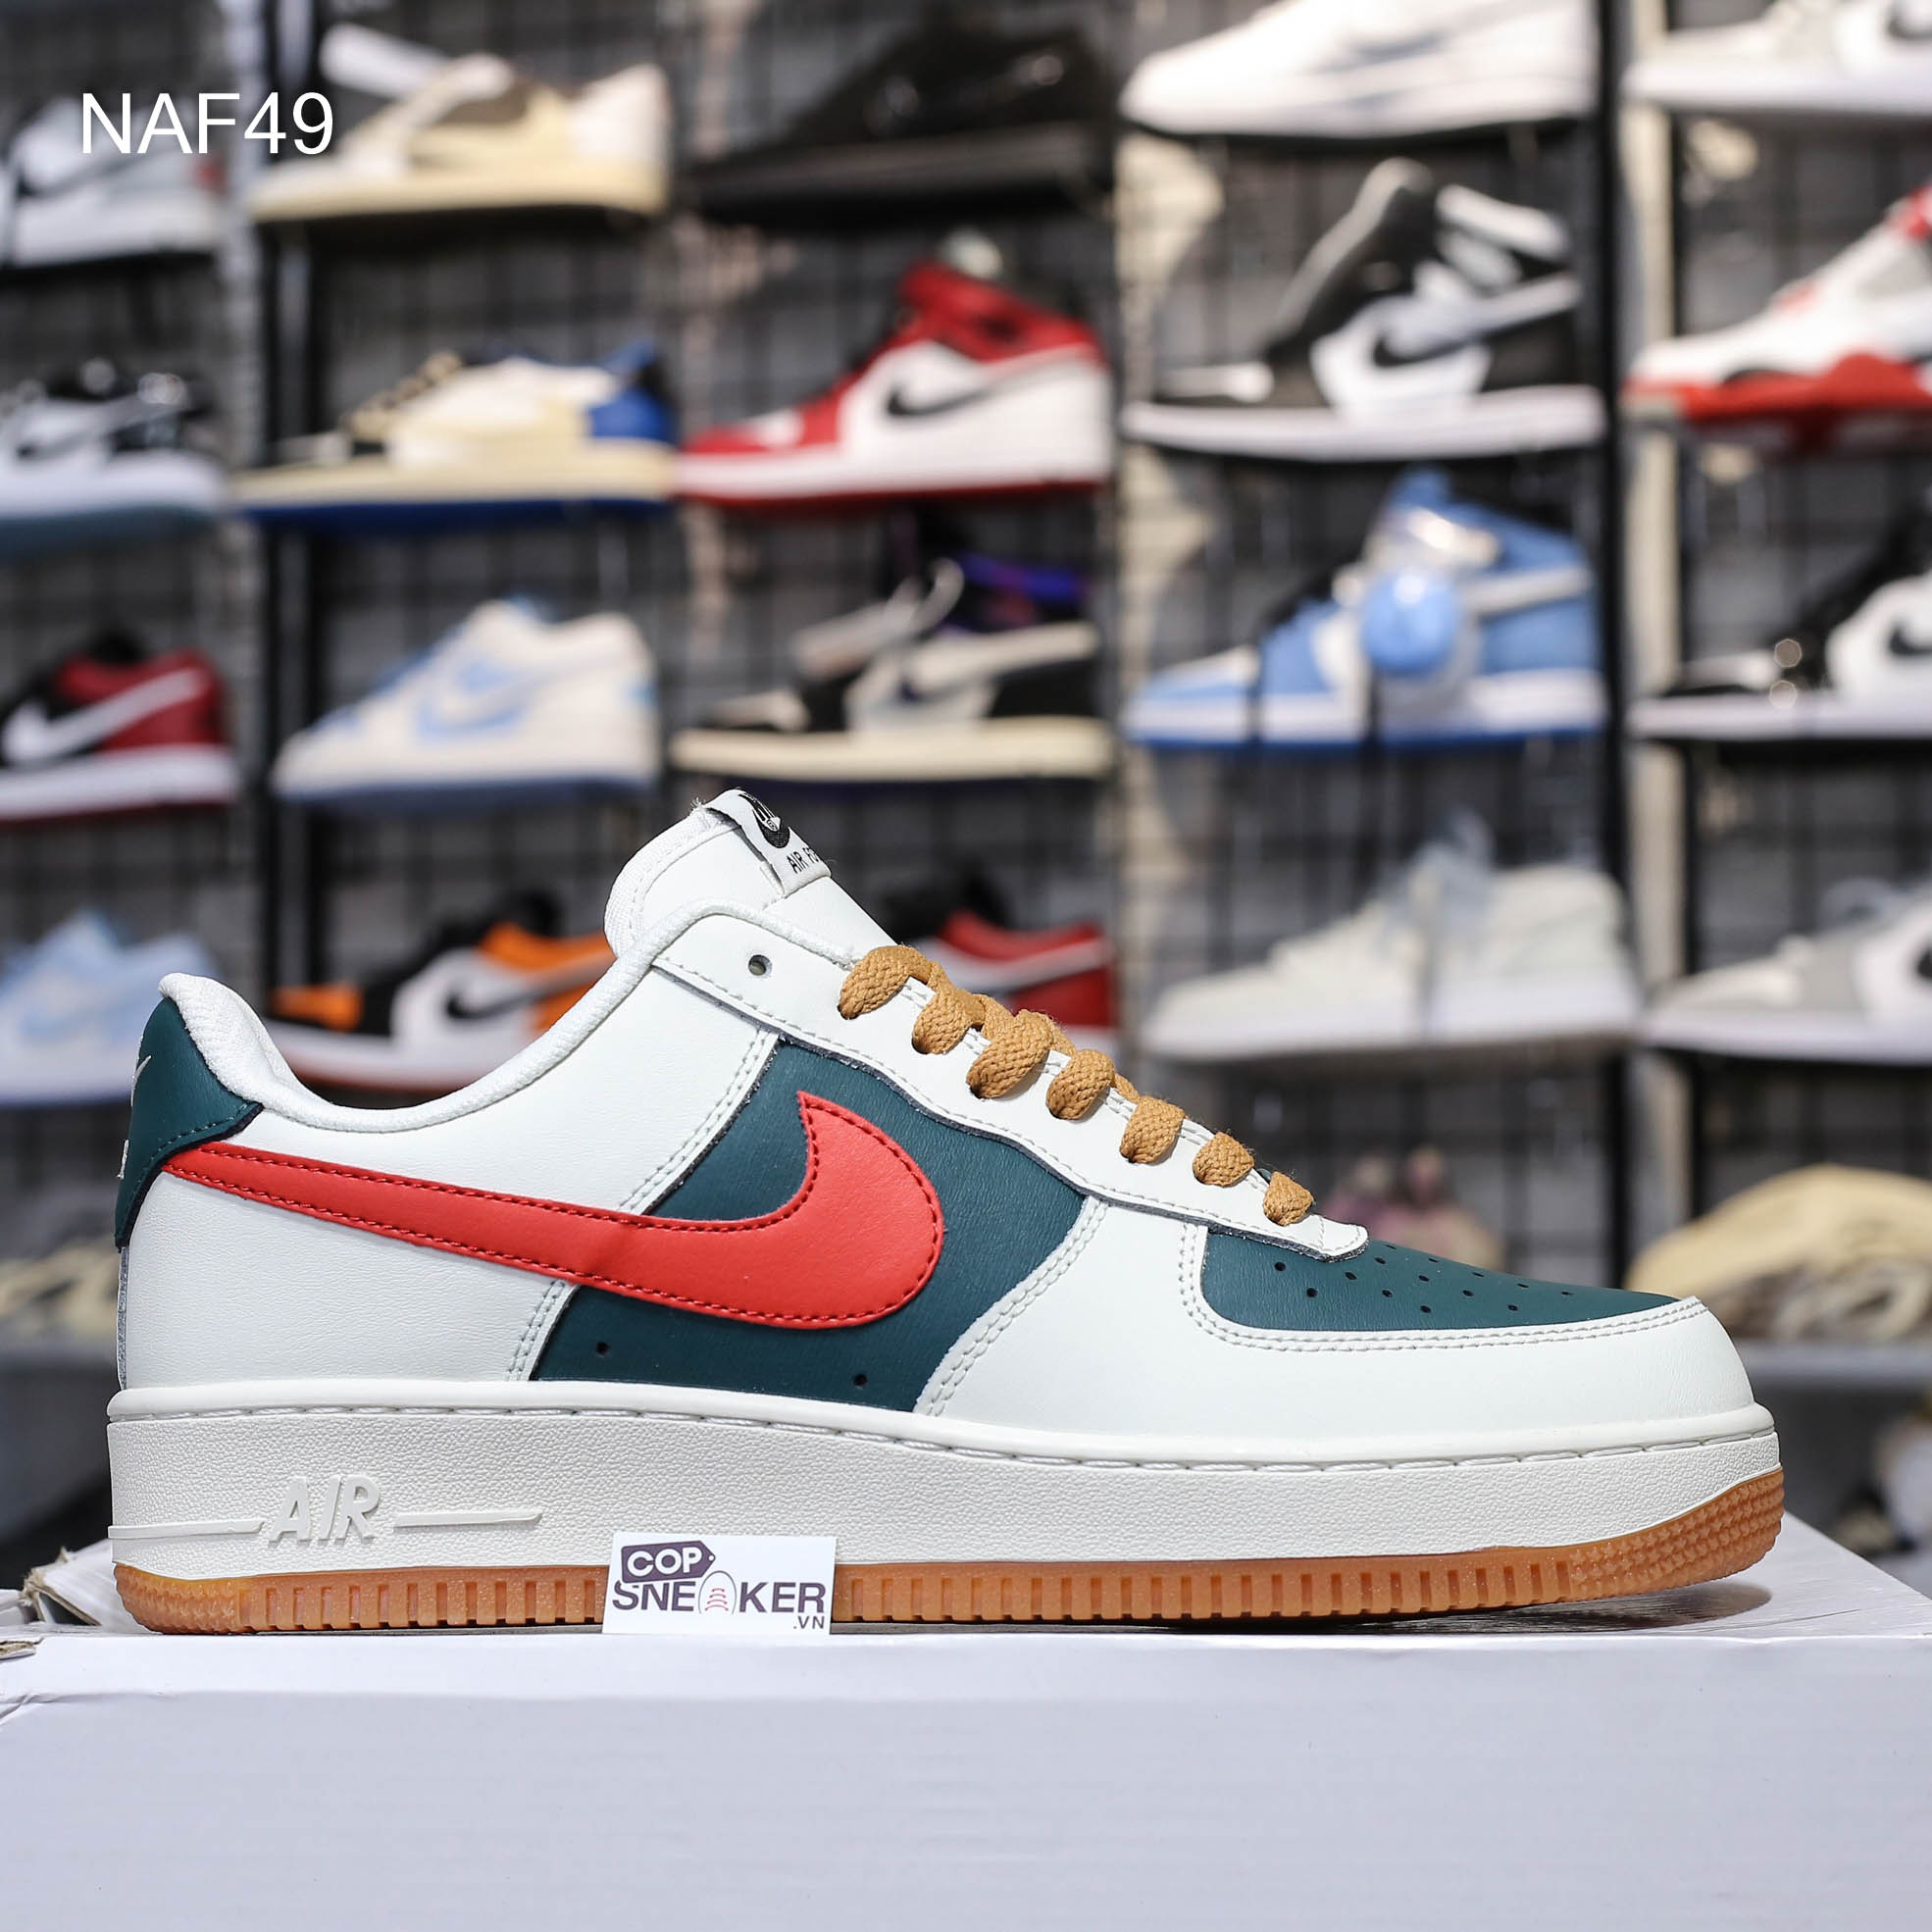 Nike Air Force 1 Low ID Gucci Cream Green Red Like Auth